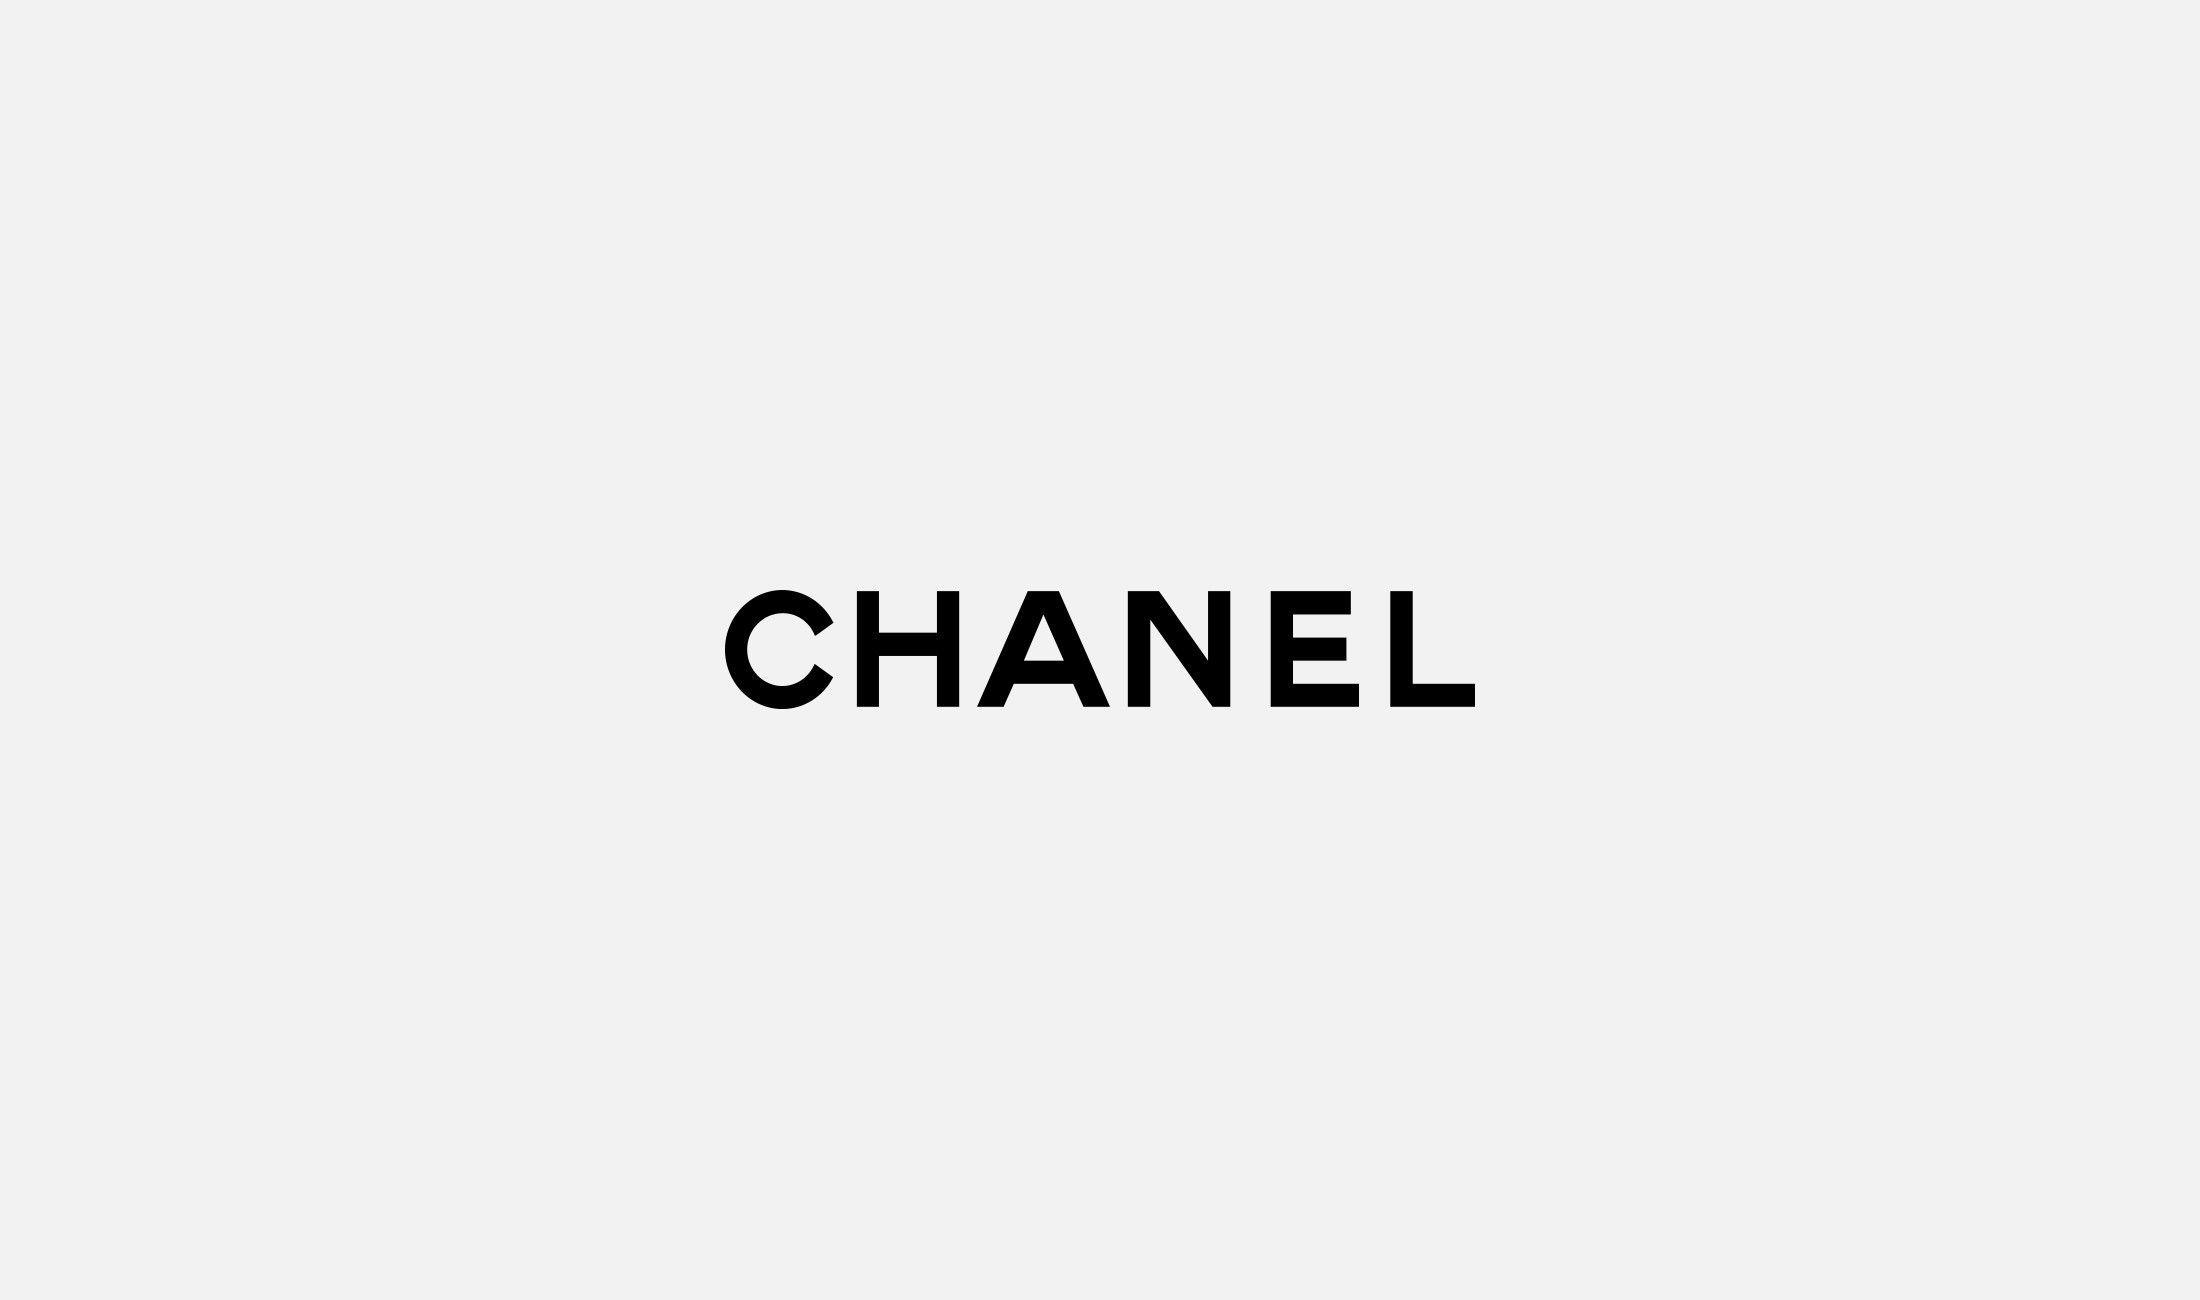 Girly Chanel Wallpaper For Iphone Chanel  Background Wallpapers